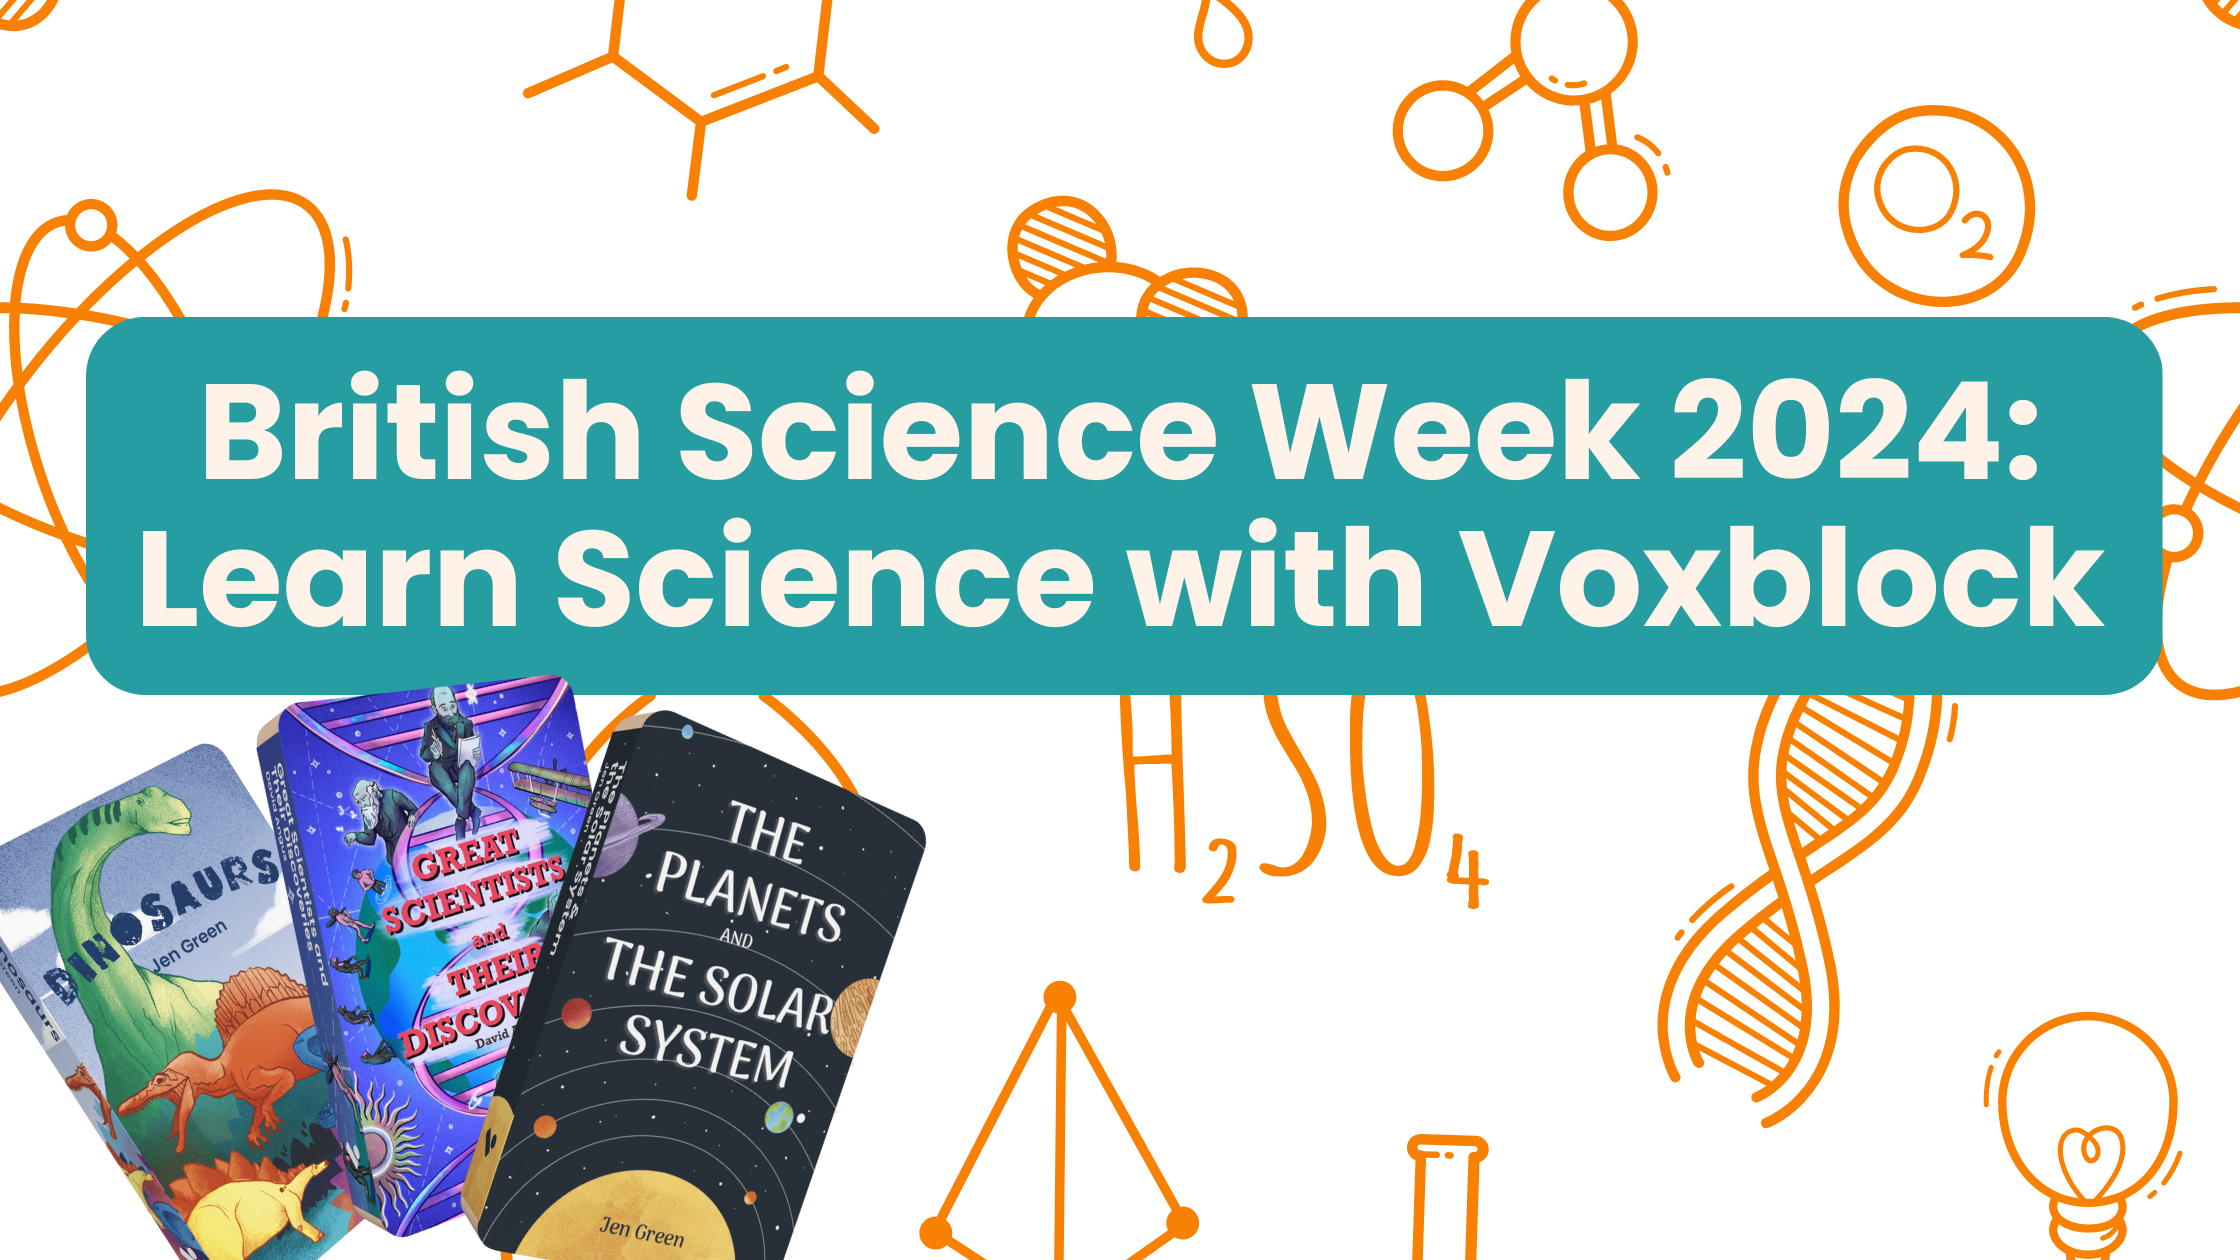 British Science Week 2024: Learn Science with Voxblock